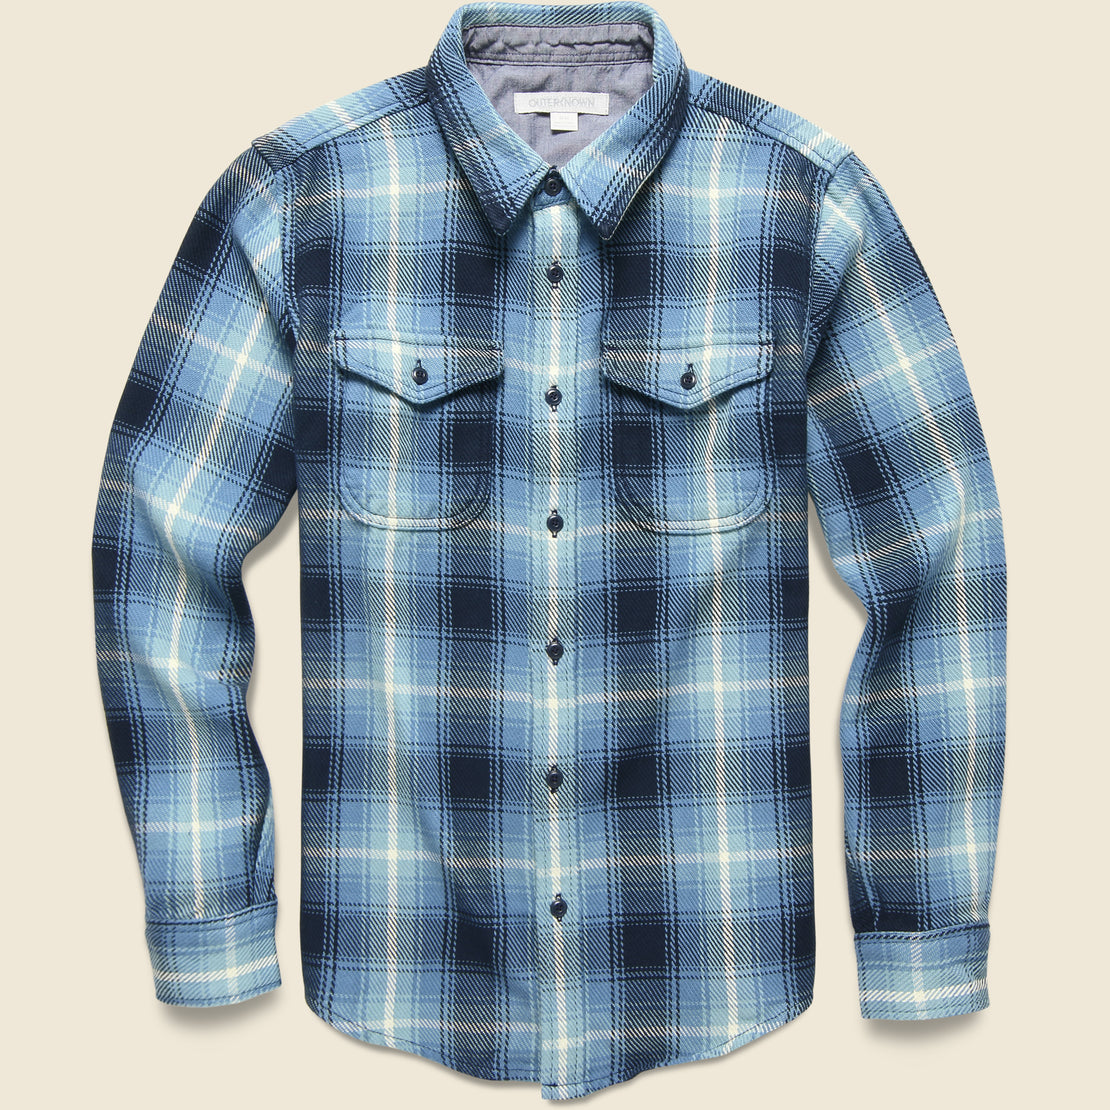 Outerknown Blanket Shirt - Puget Plaid